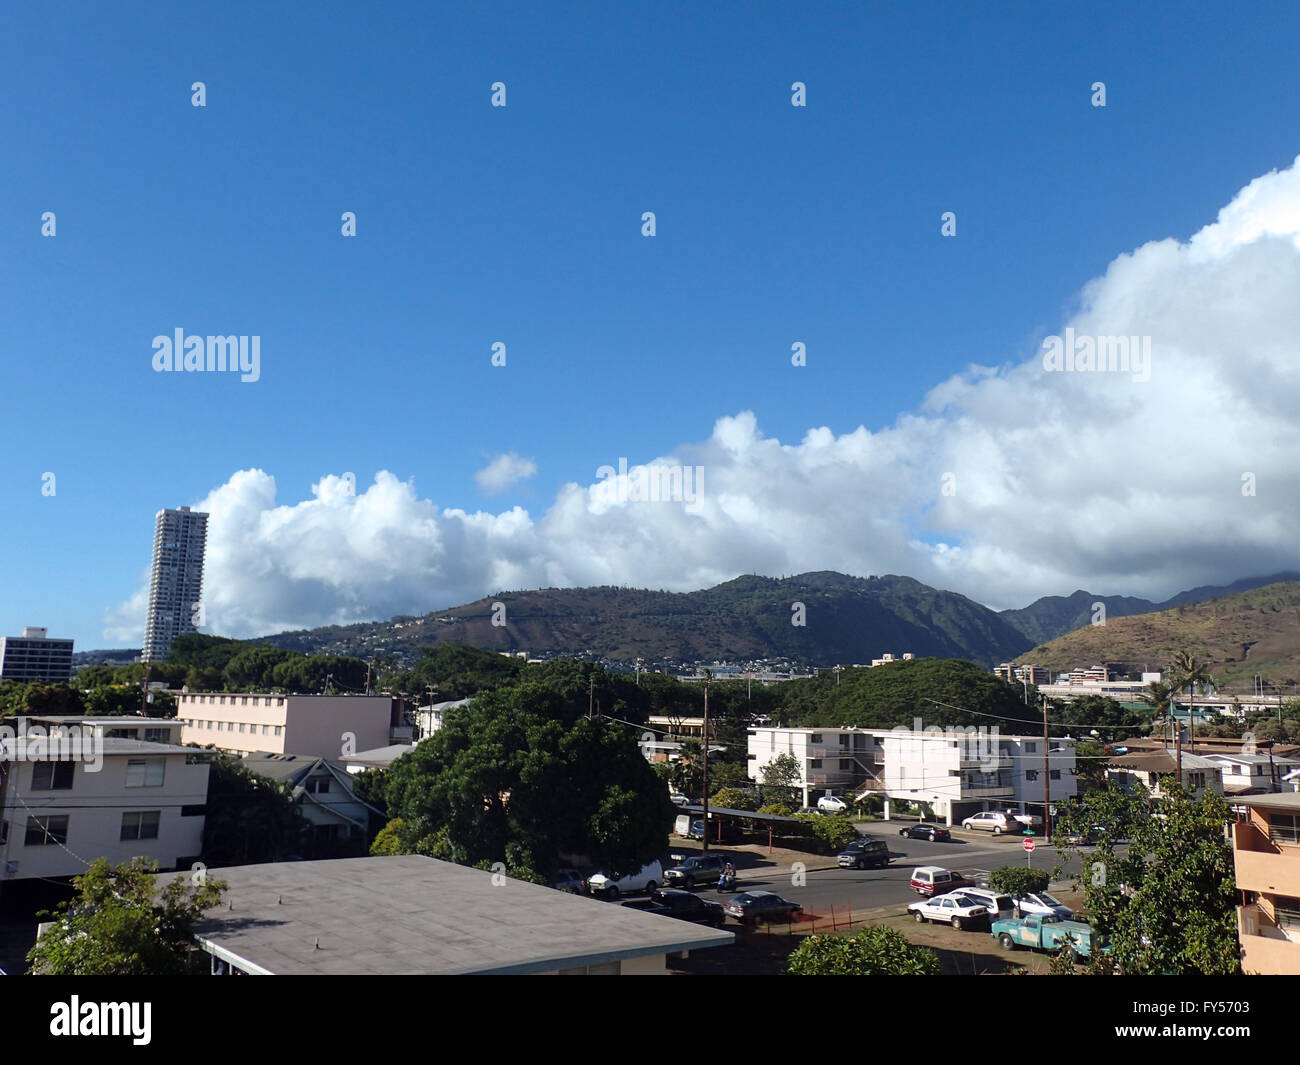 Kapahulu town in Honolulu with homes, condos, and mountains of Tantalus and St. Louis Heights on a clear day on Oahu, Hawaii Stock Photo